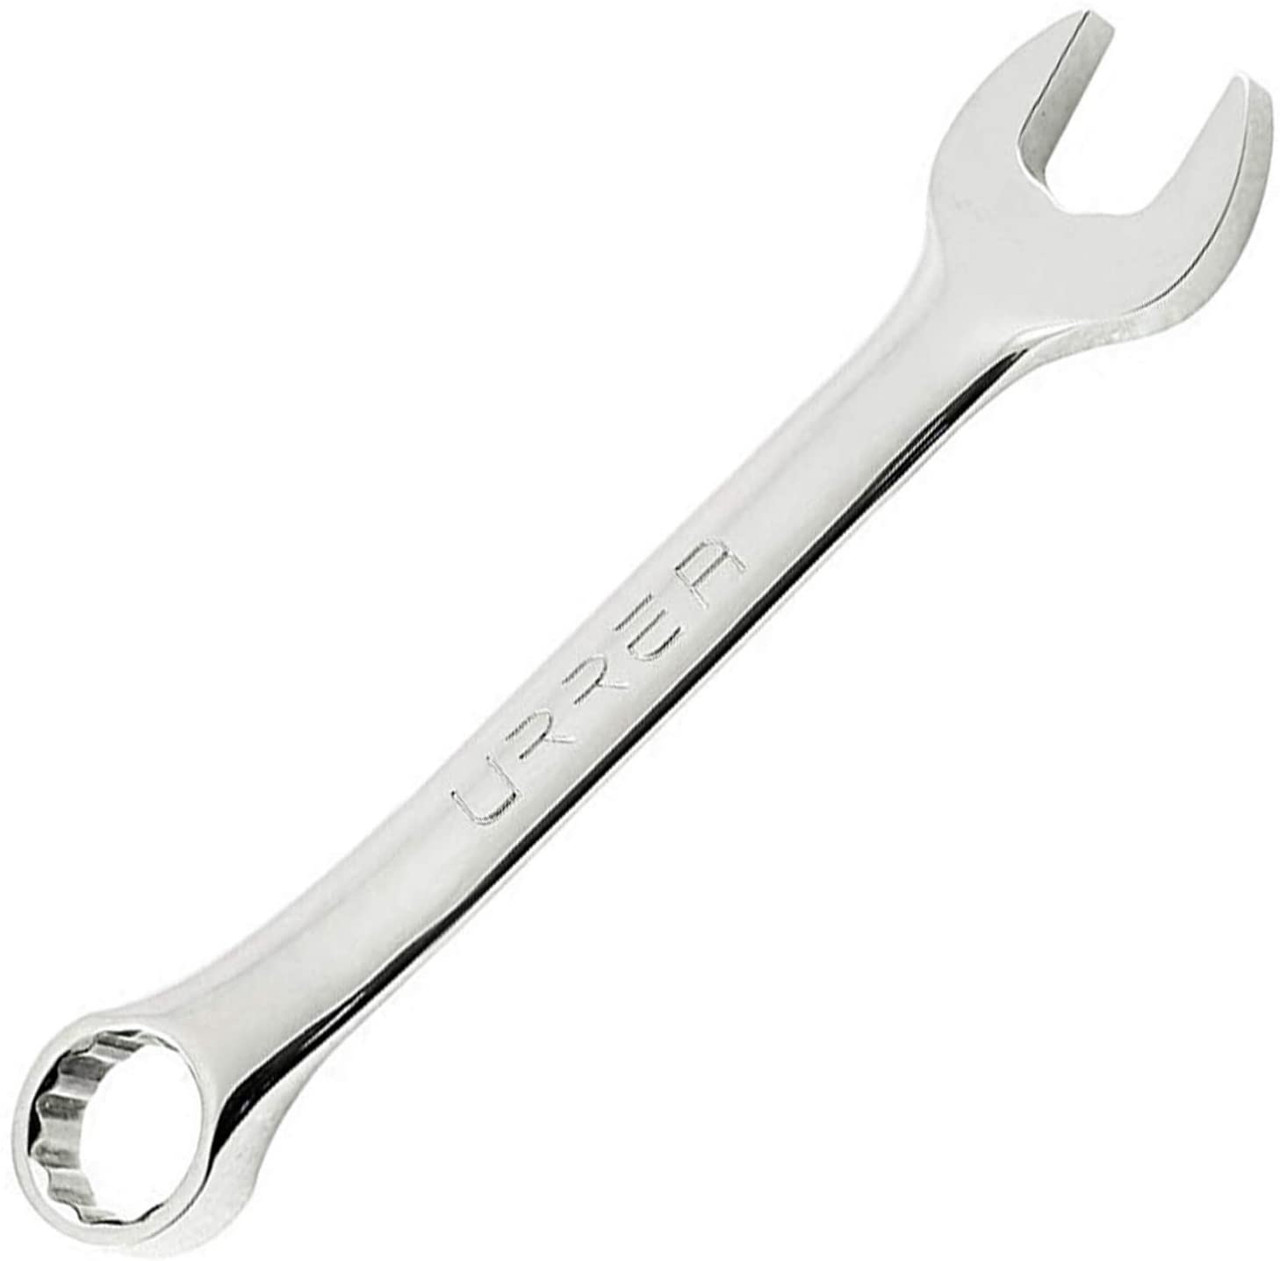 Full polished short combination wrench, Size: 12 mm, 12 point, Total Length: 5-1/4"